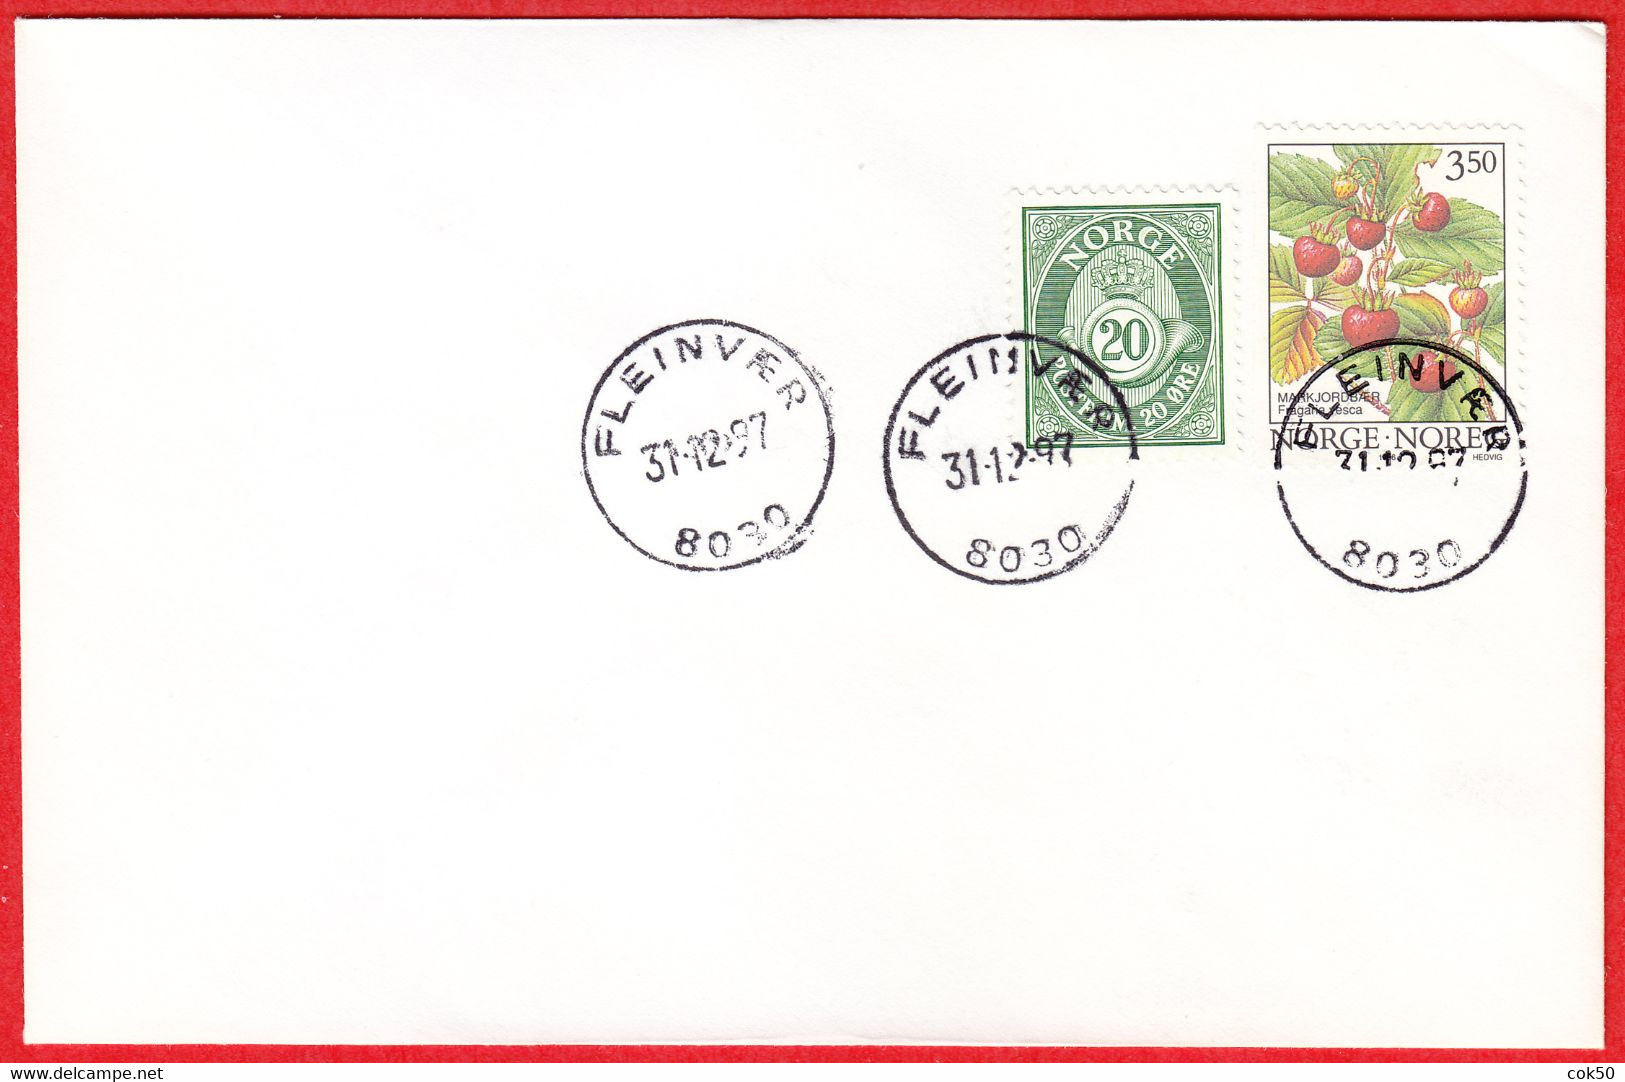 NORWAY -  8030 FLEINVÆR (Nordland County) - Last Day/postoffice Closed On 1997.12.31 - Local Post Stamps